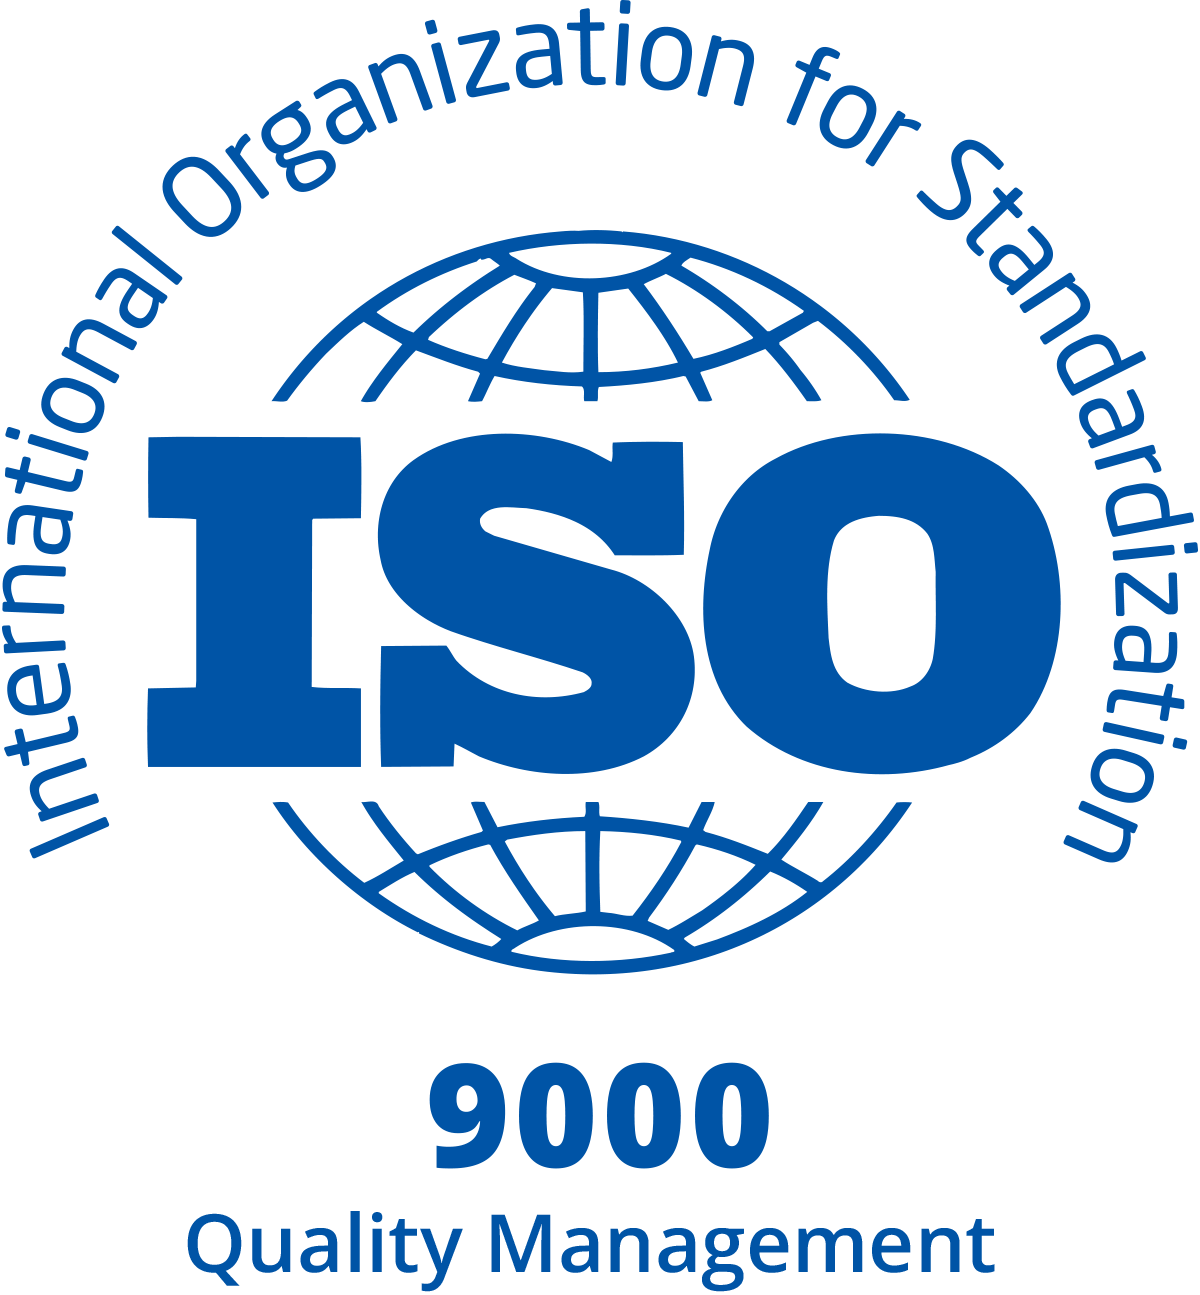 ISO 9000 Definition | Arena